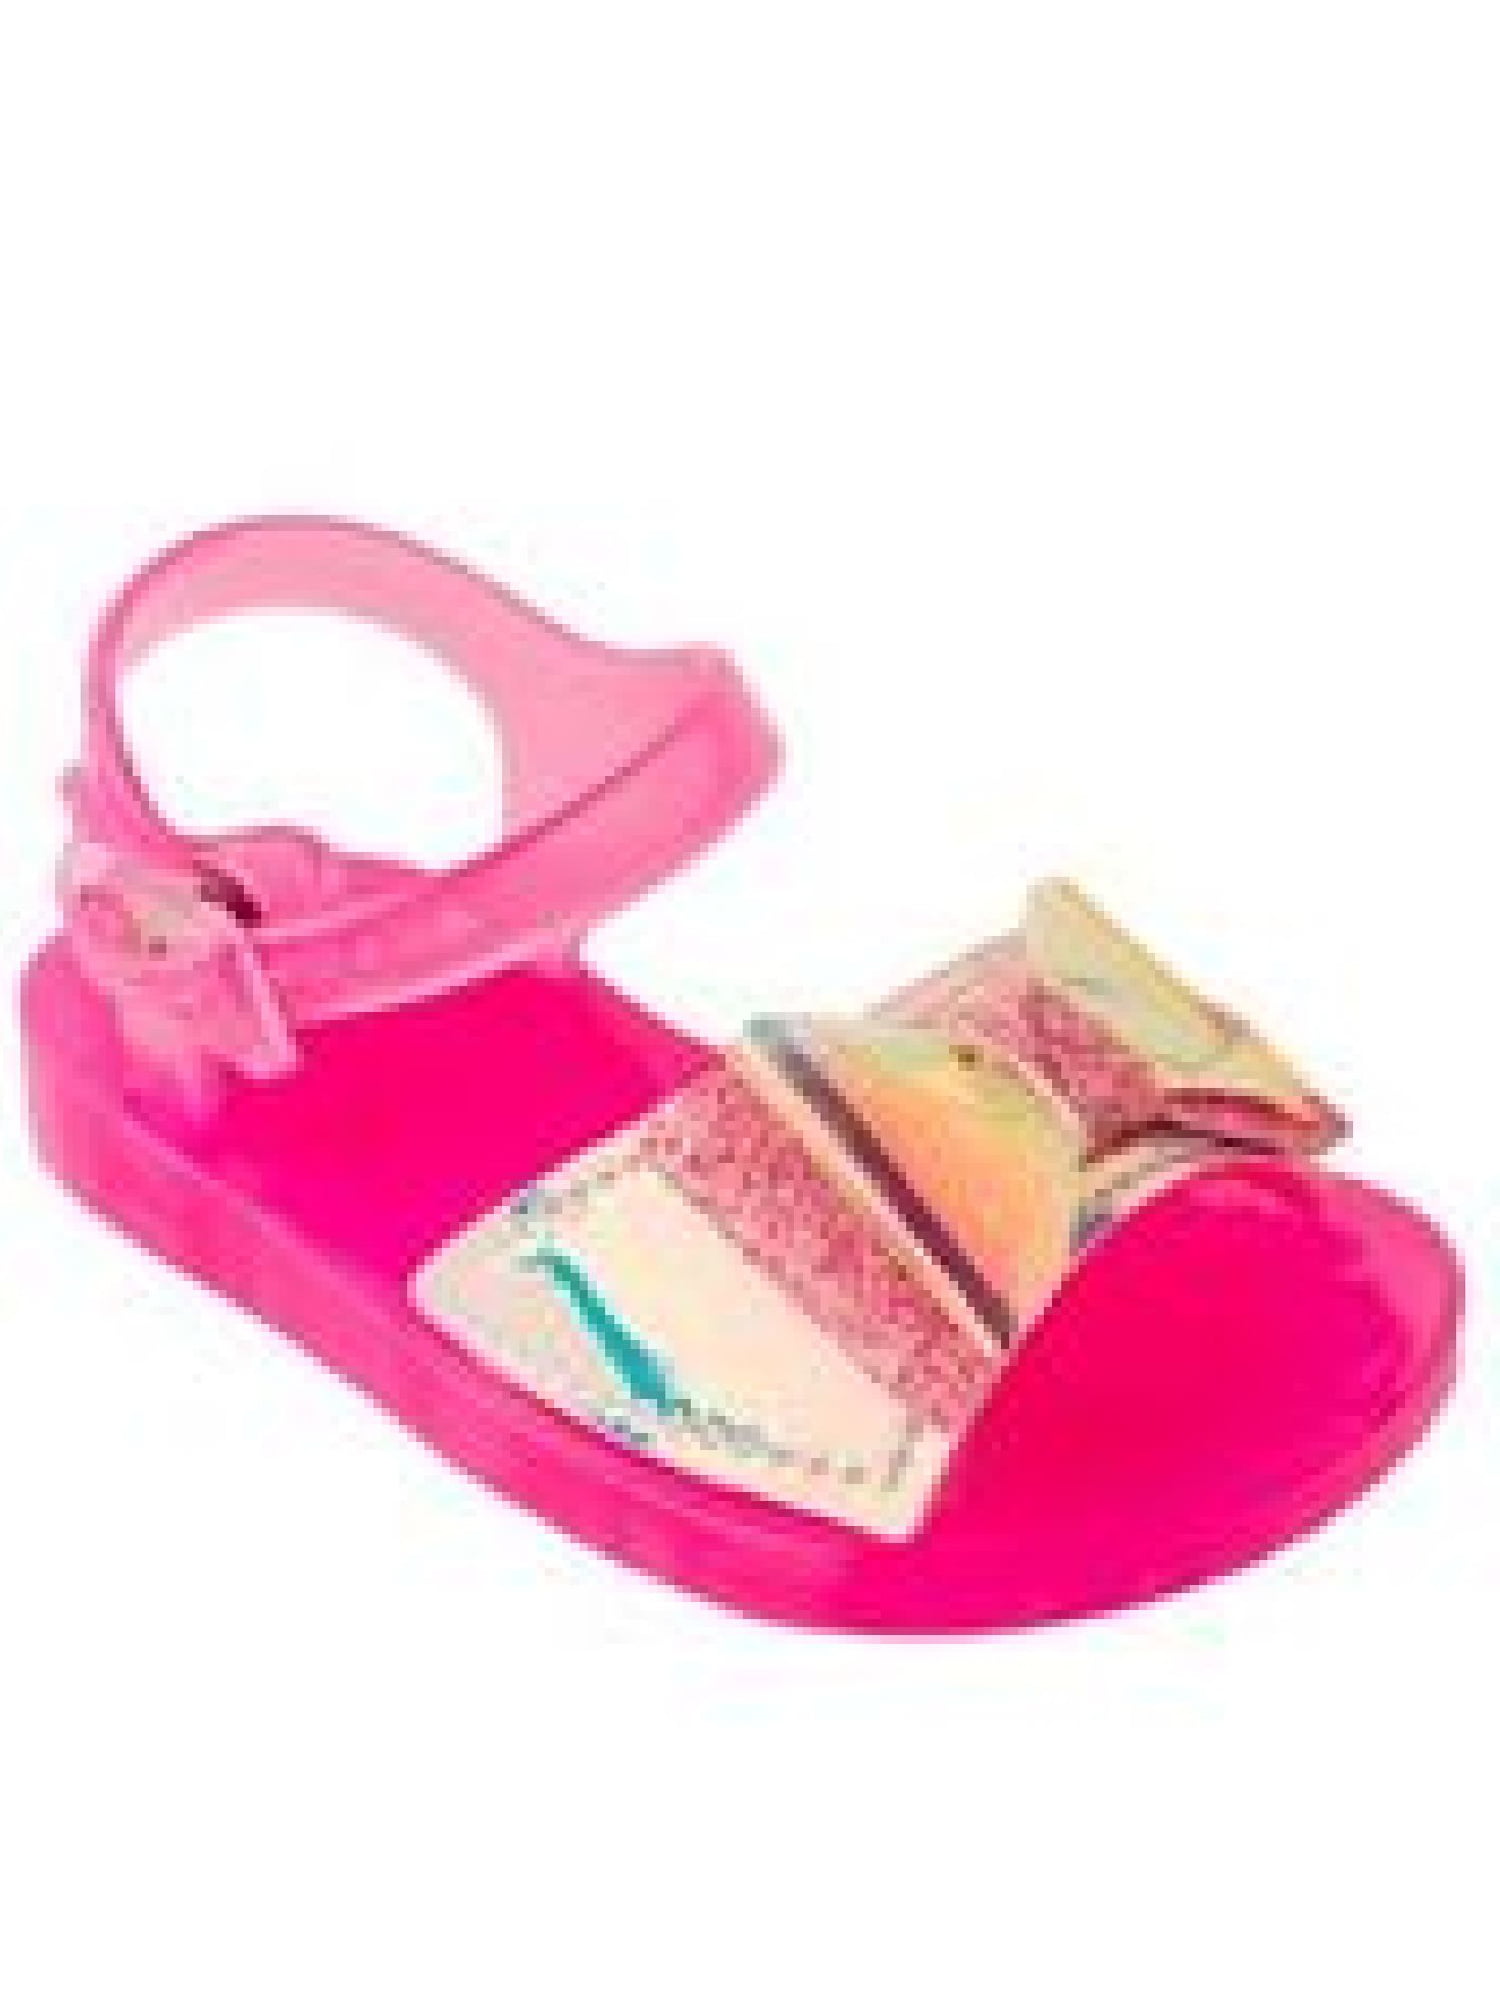 pink sandals for baby girl